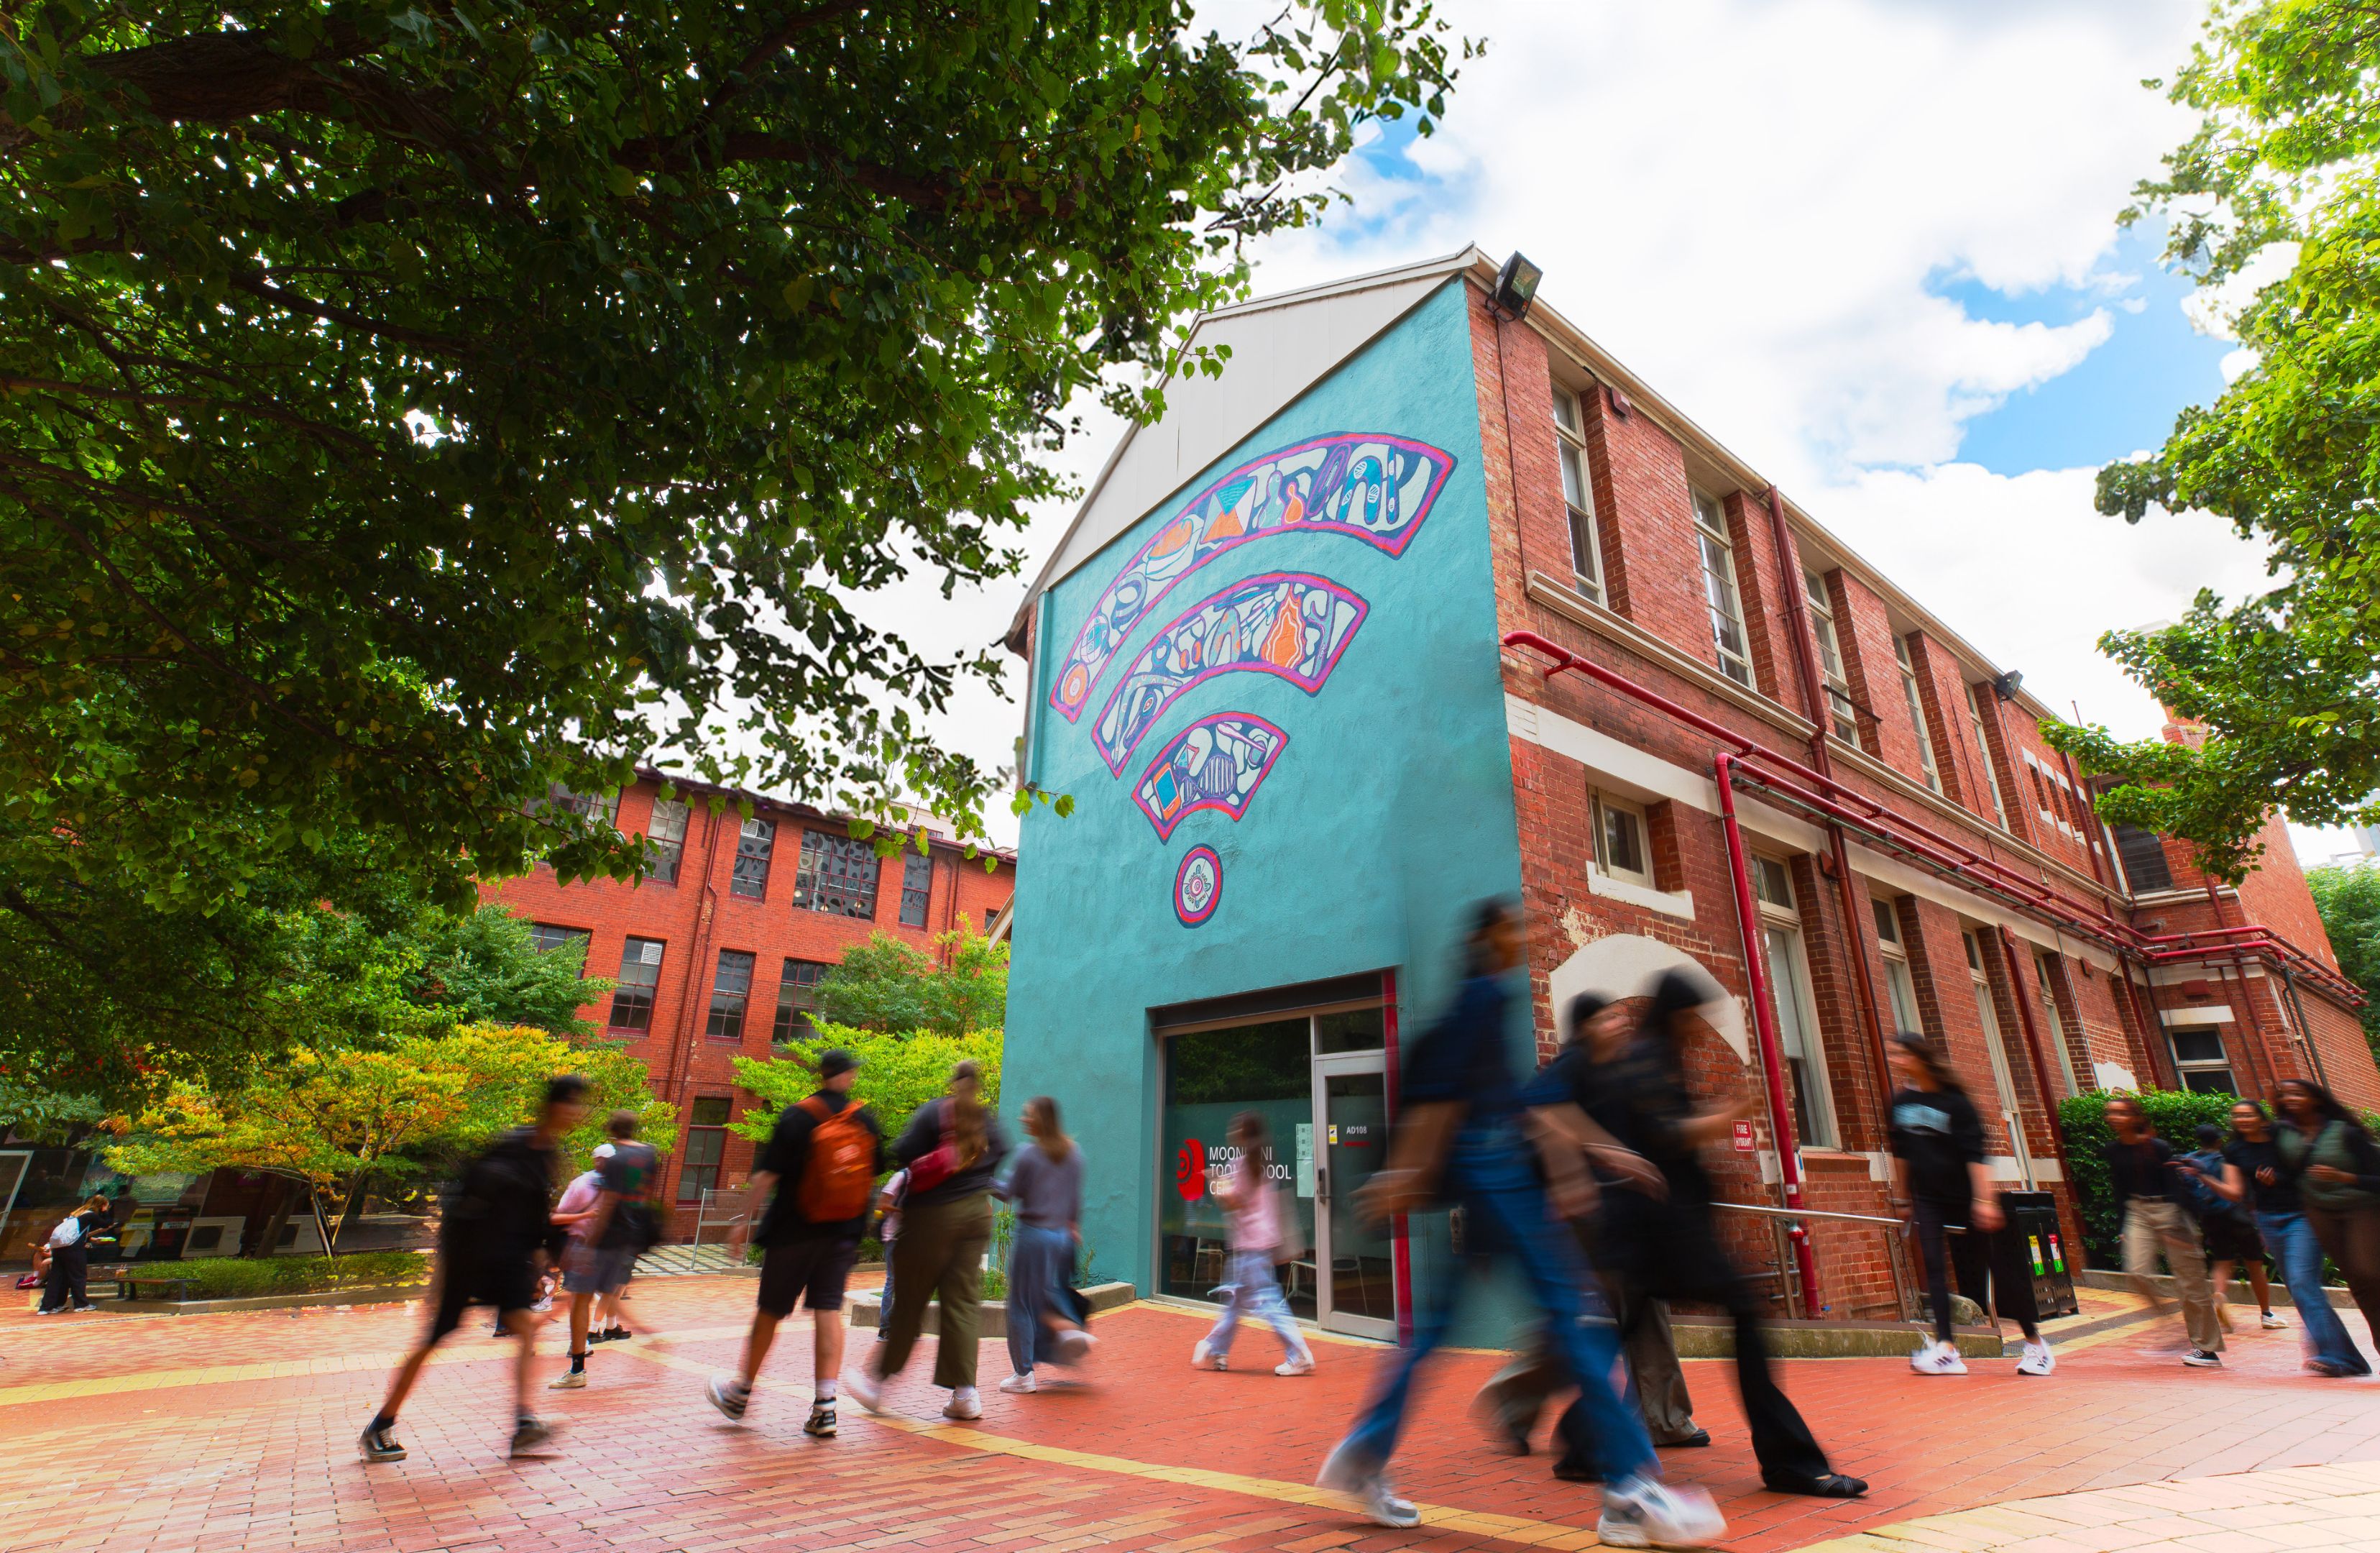 The exterior of the Moondani Toombadool Centre building on Swinburne's Hawthorn campus featuring mural by artist Mandi Barton